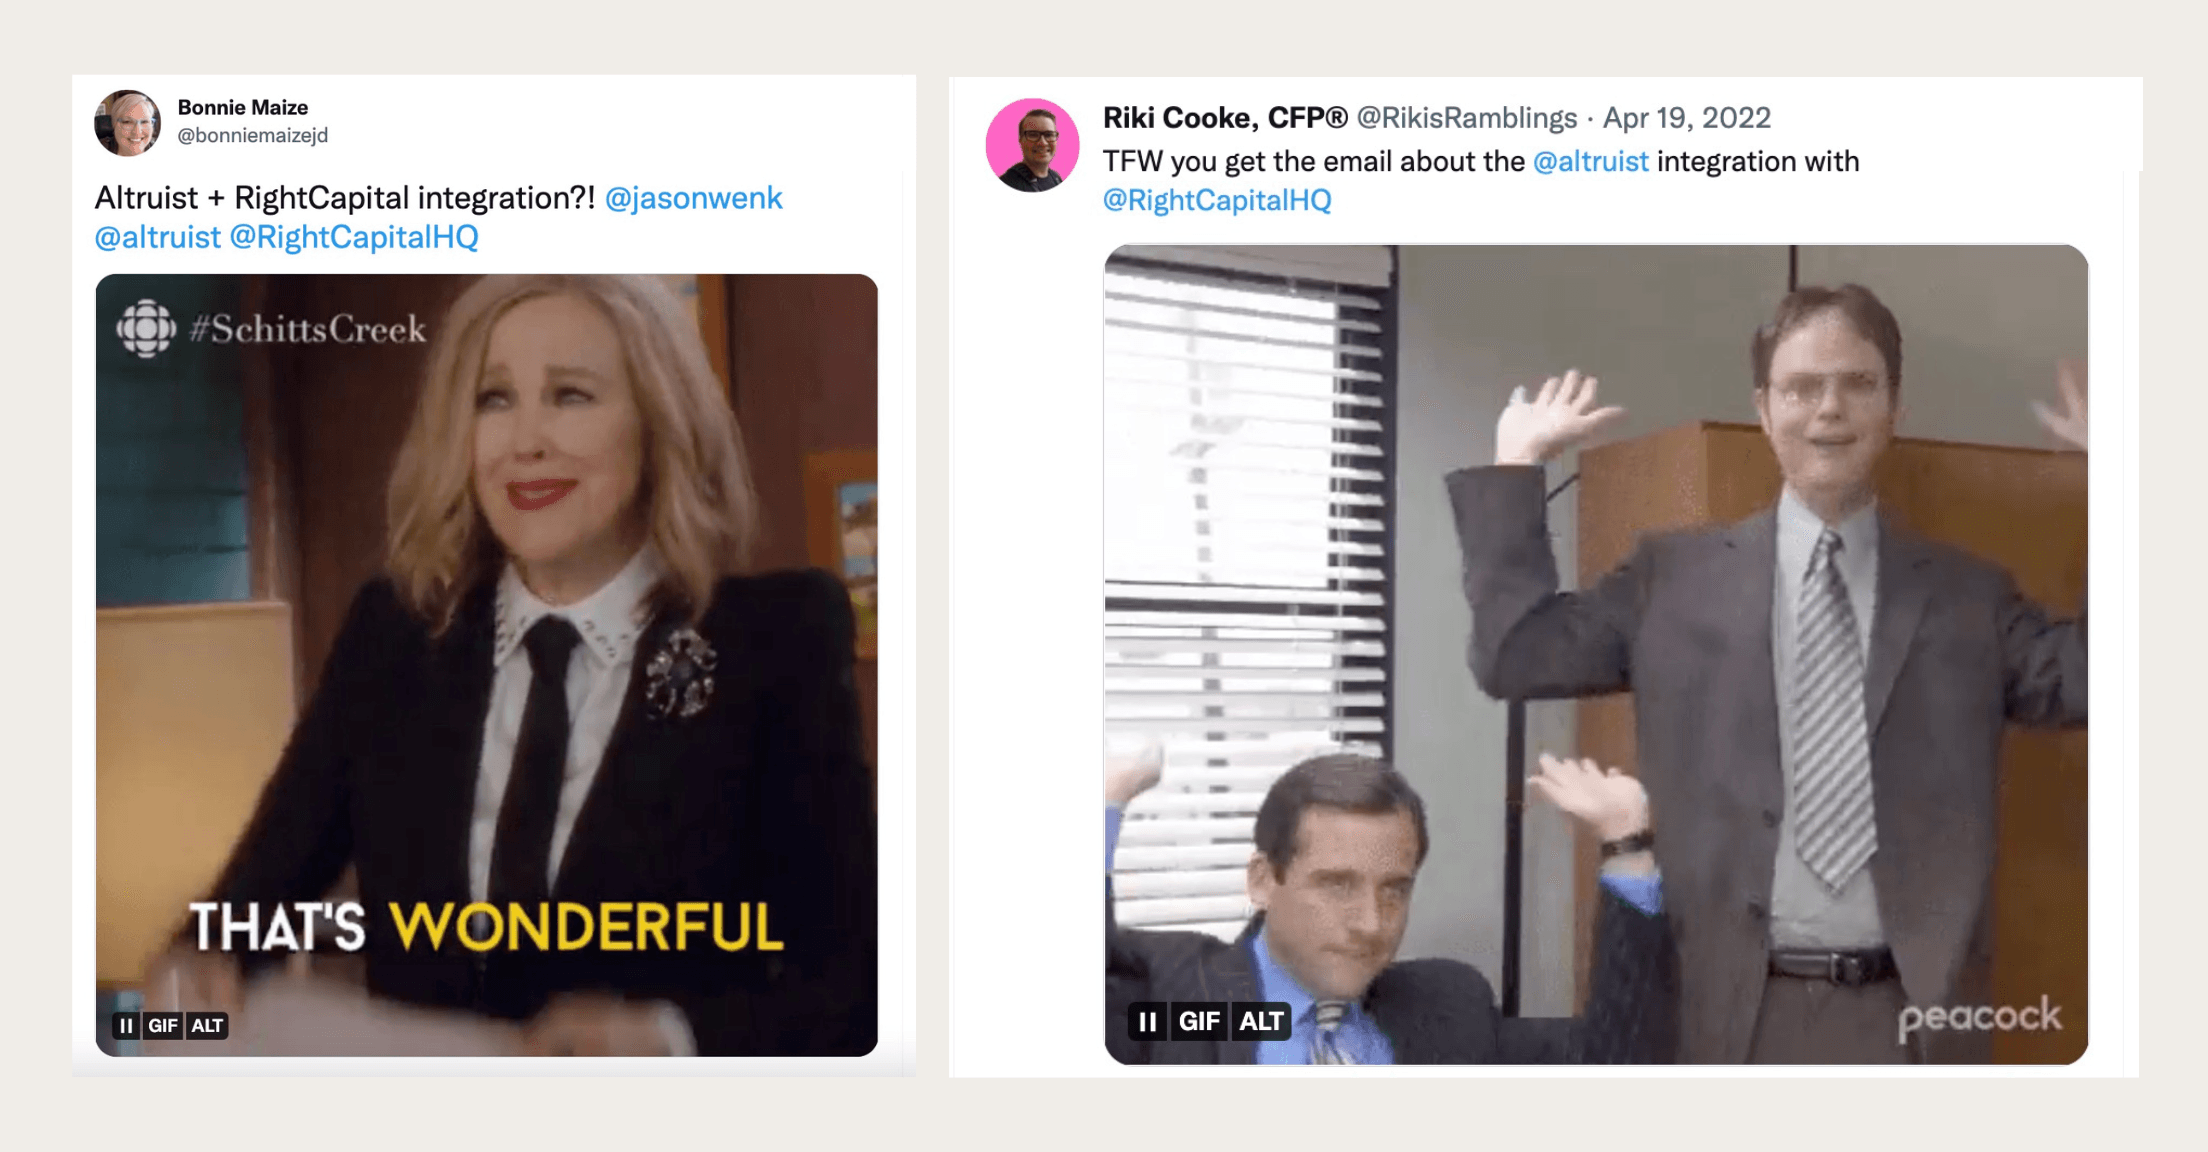 Two tweets from RightCapital advisors showing their excitement about an integration with Altruist with gifs from television shows Schitt's Creek and The Office